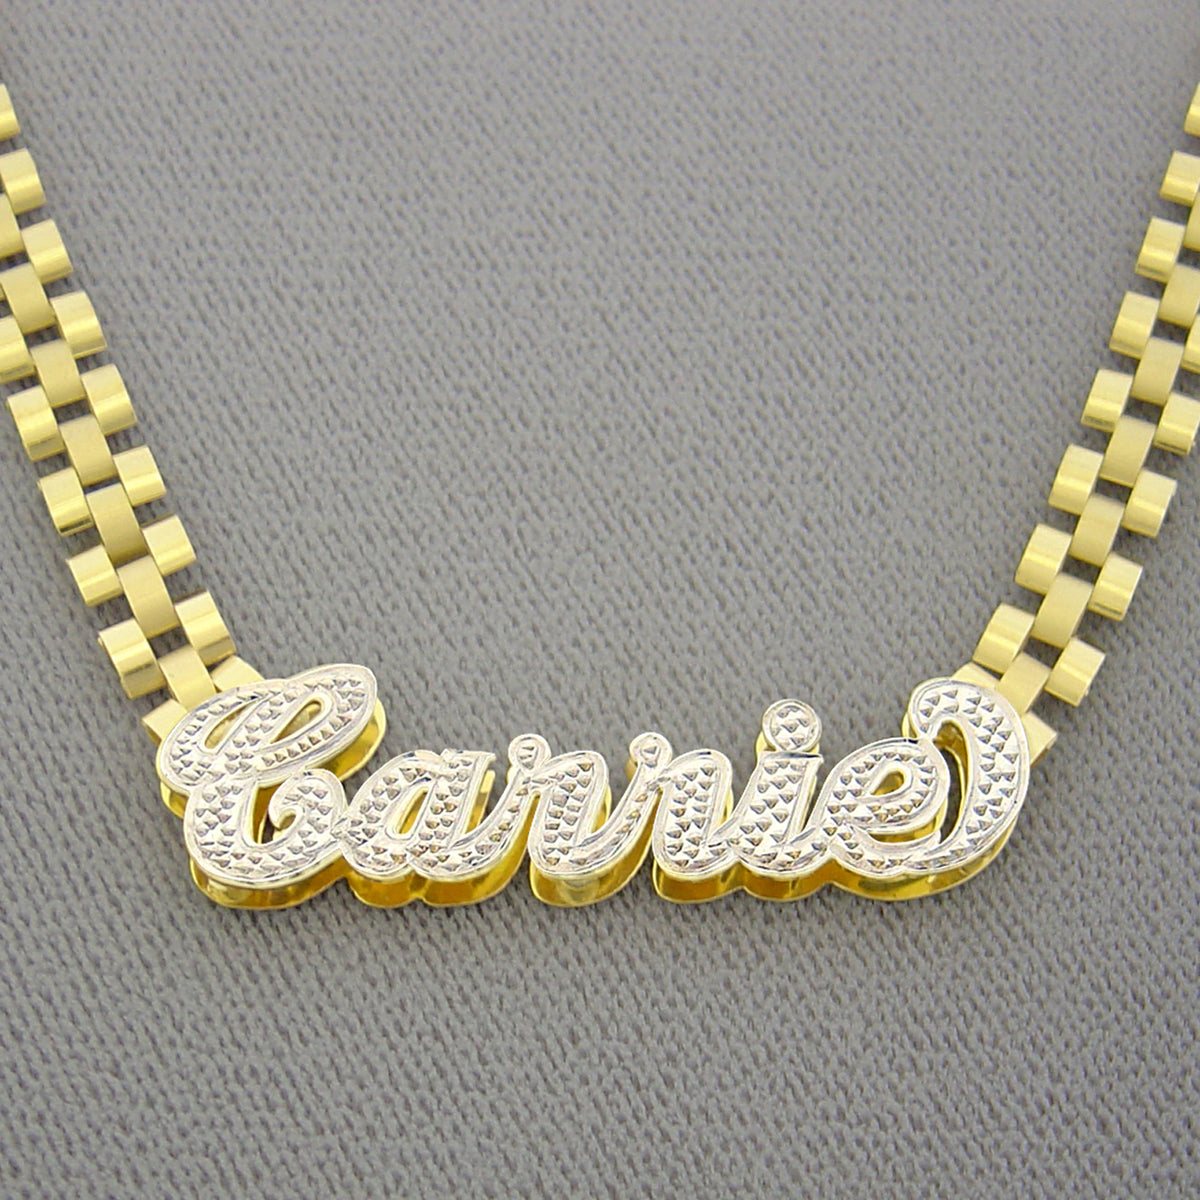 Real 10K Solid Gold Iced Out Personalized Name 6 mm Watch-Band Link Style Chain Hip Hop Fine Jewelry.